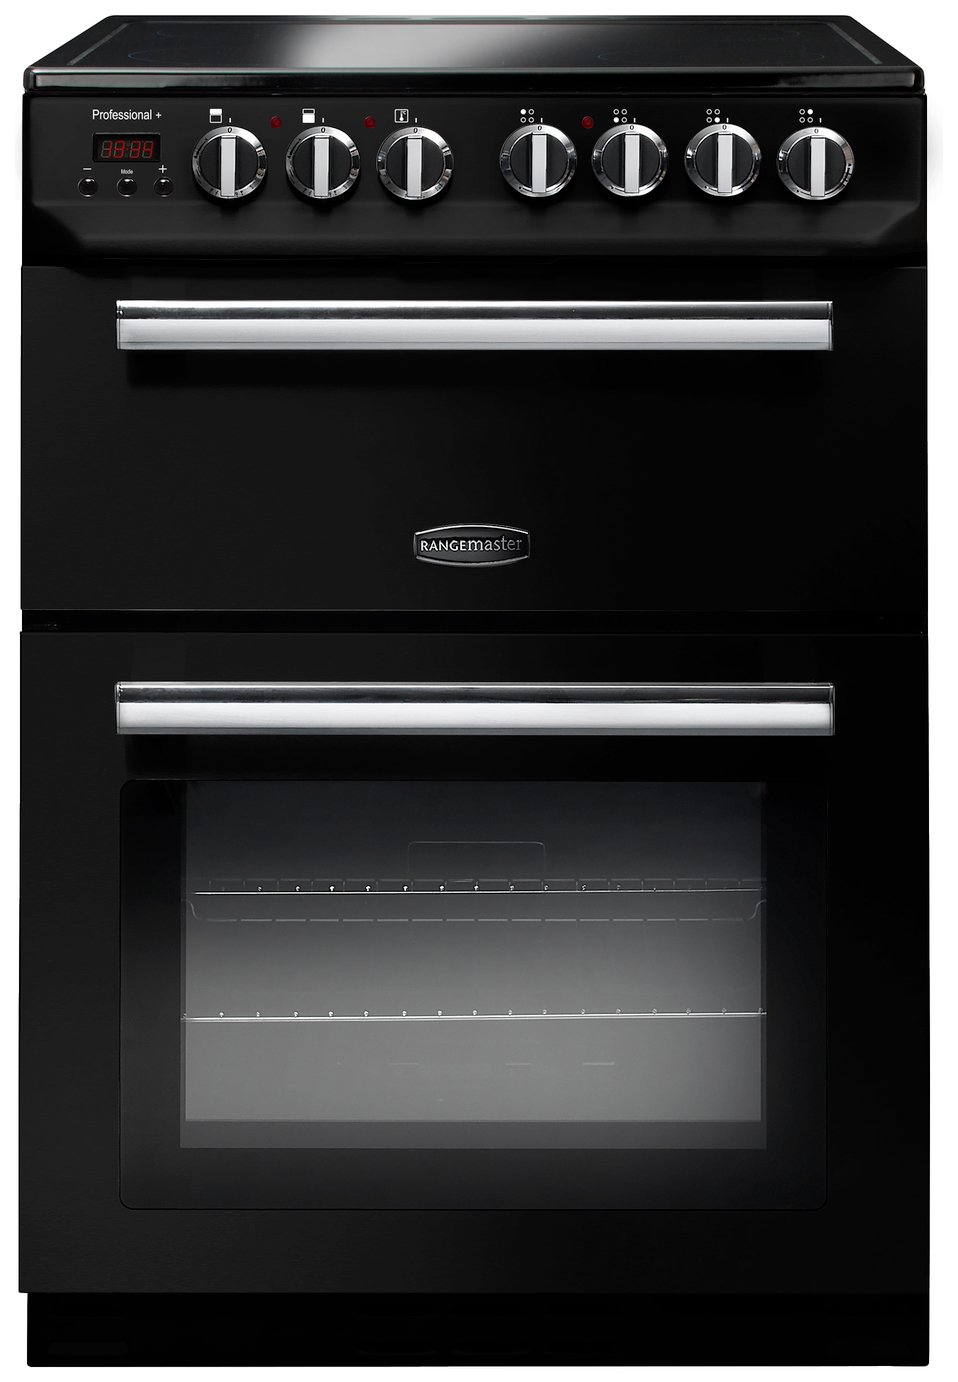 Rangemaster Professional Double Electric Cooker - Black